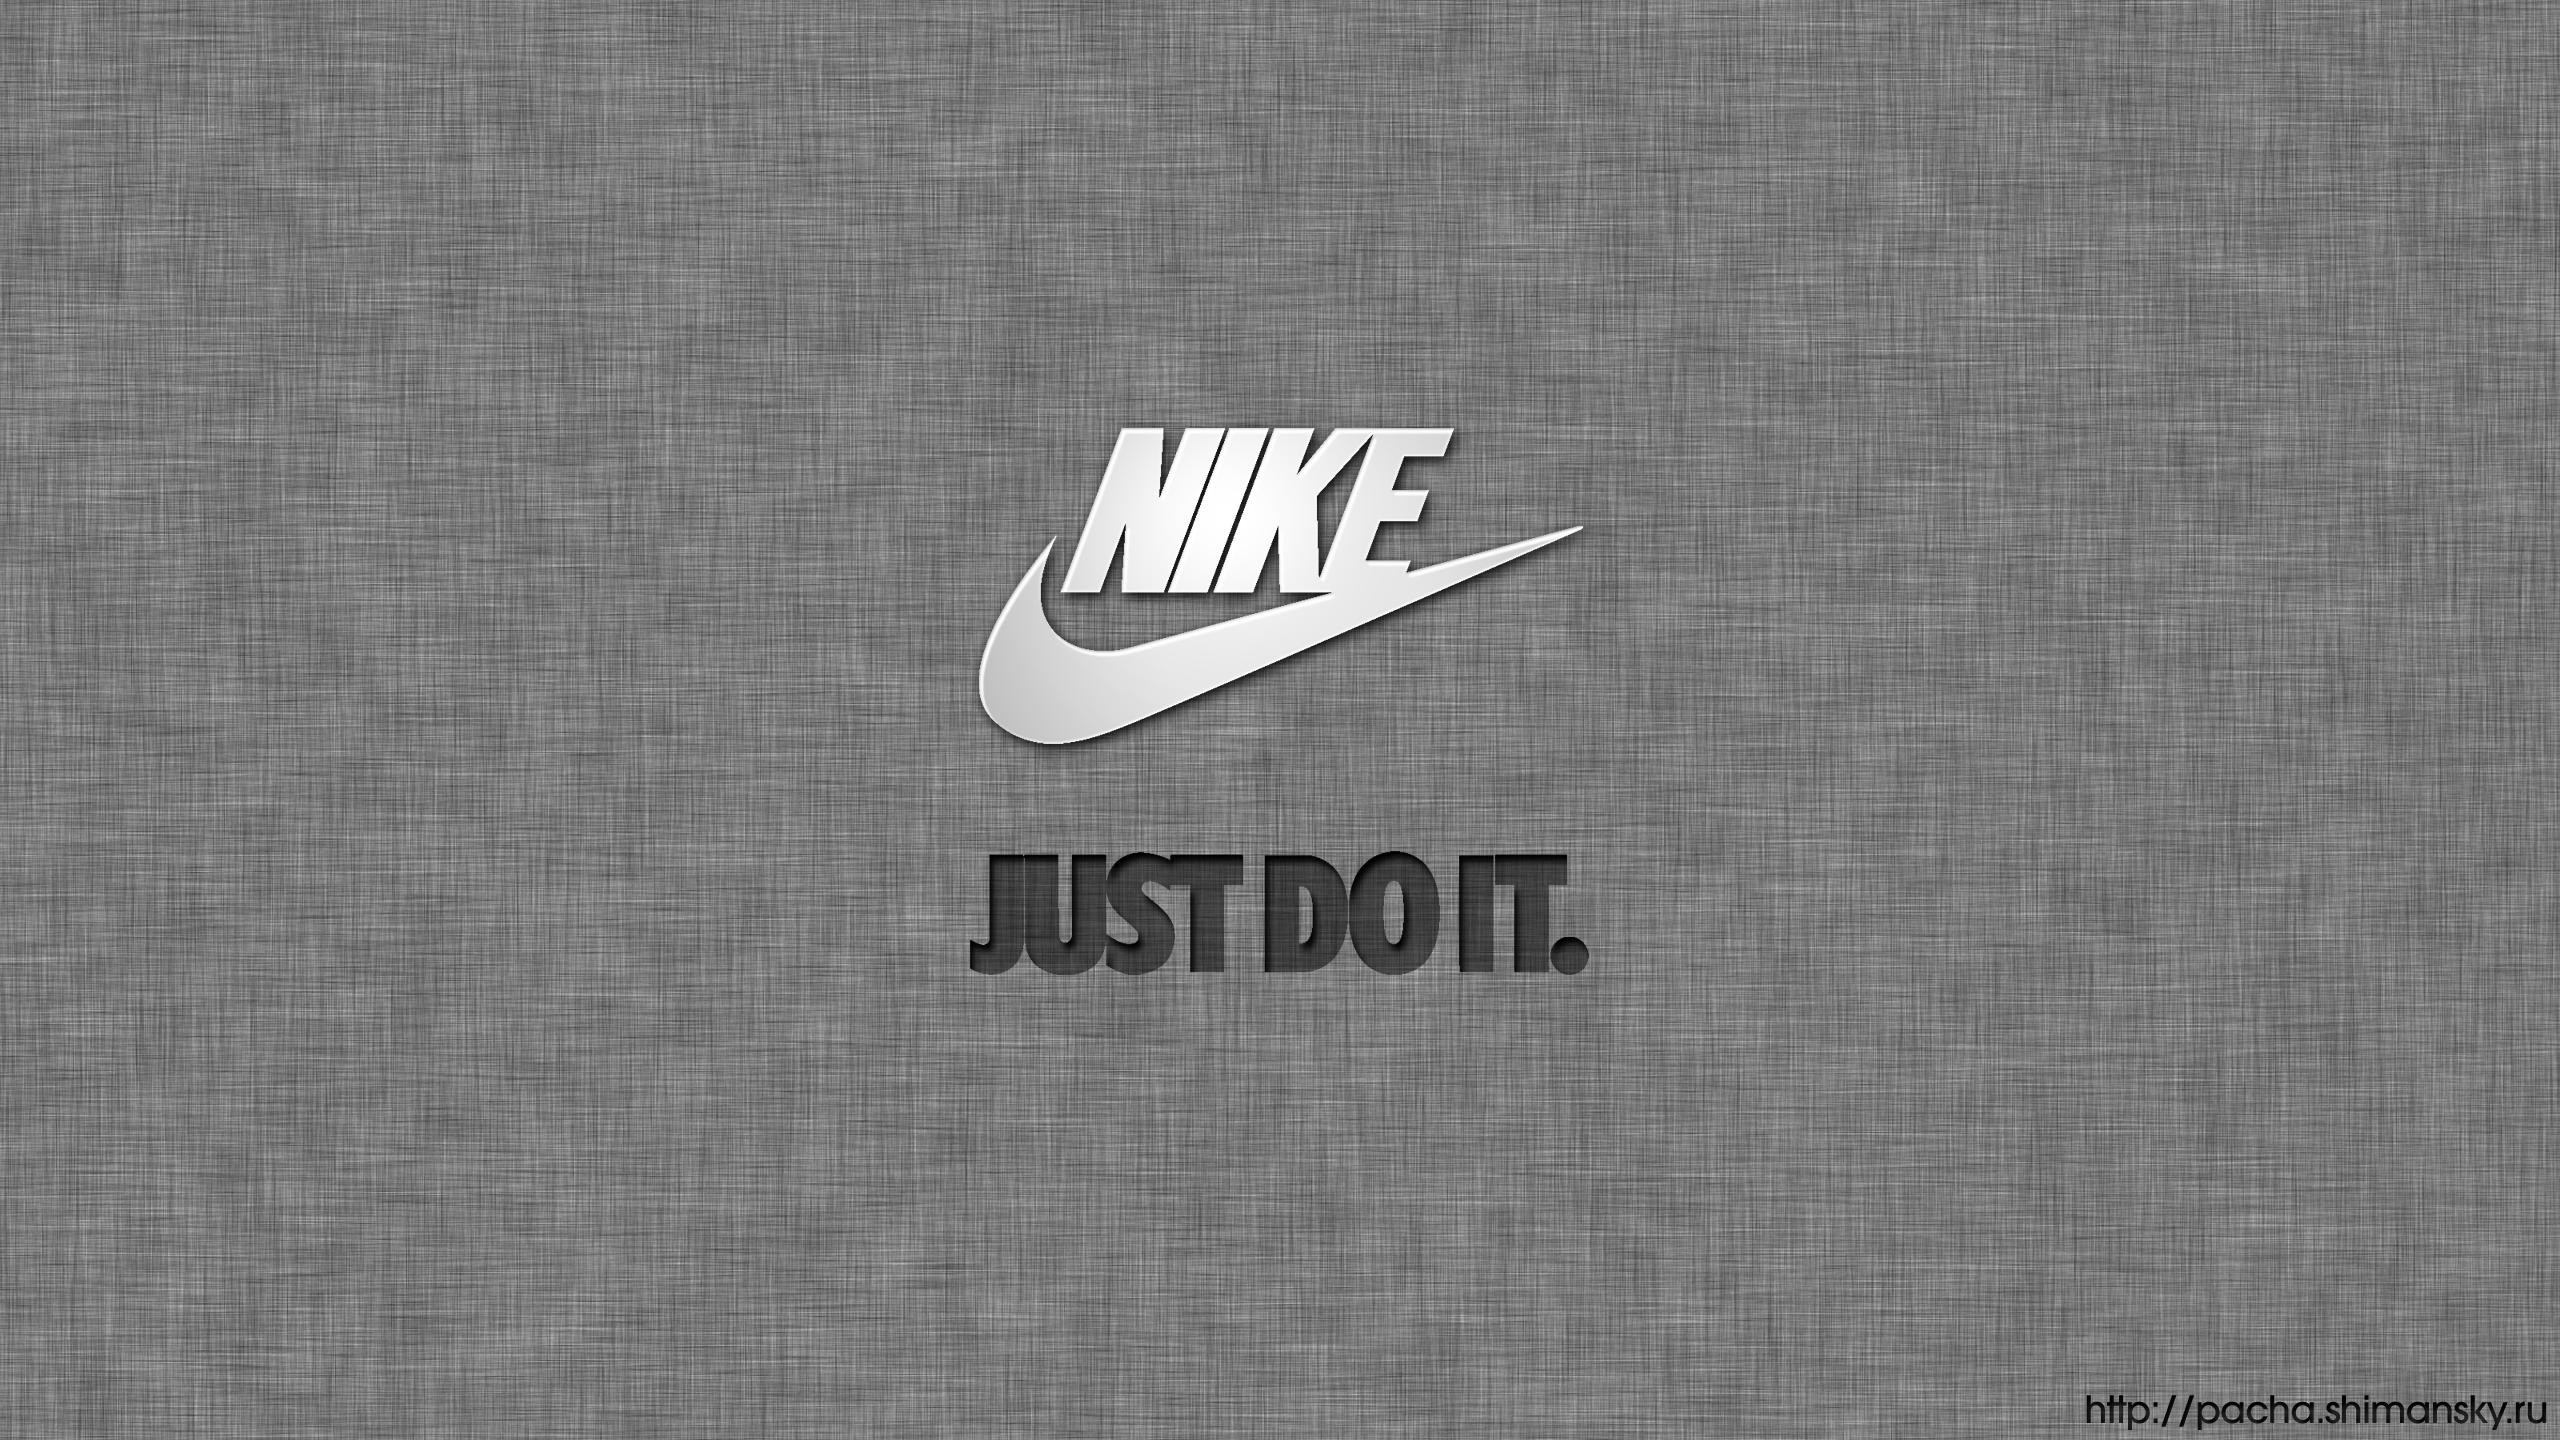 Nike Images Just Do It Wallpapers